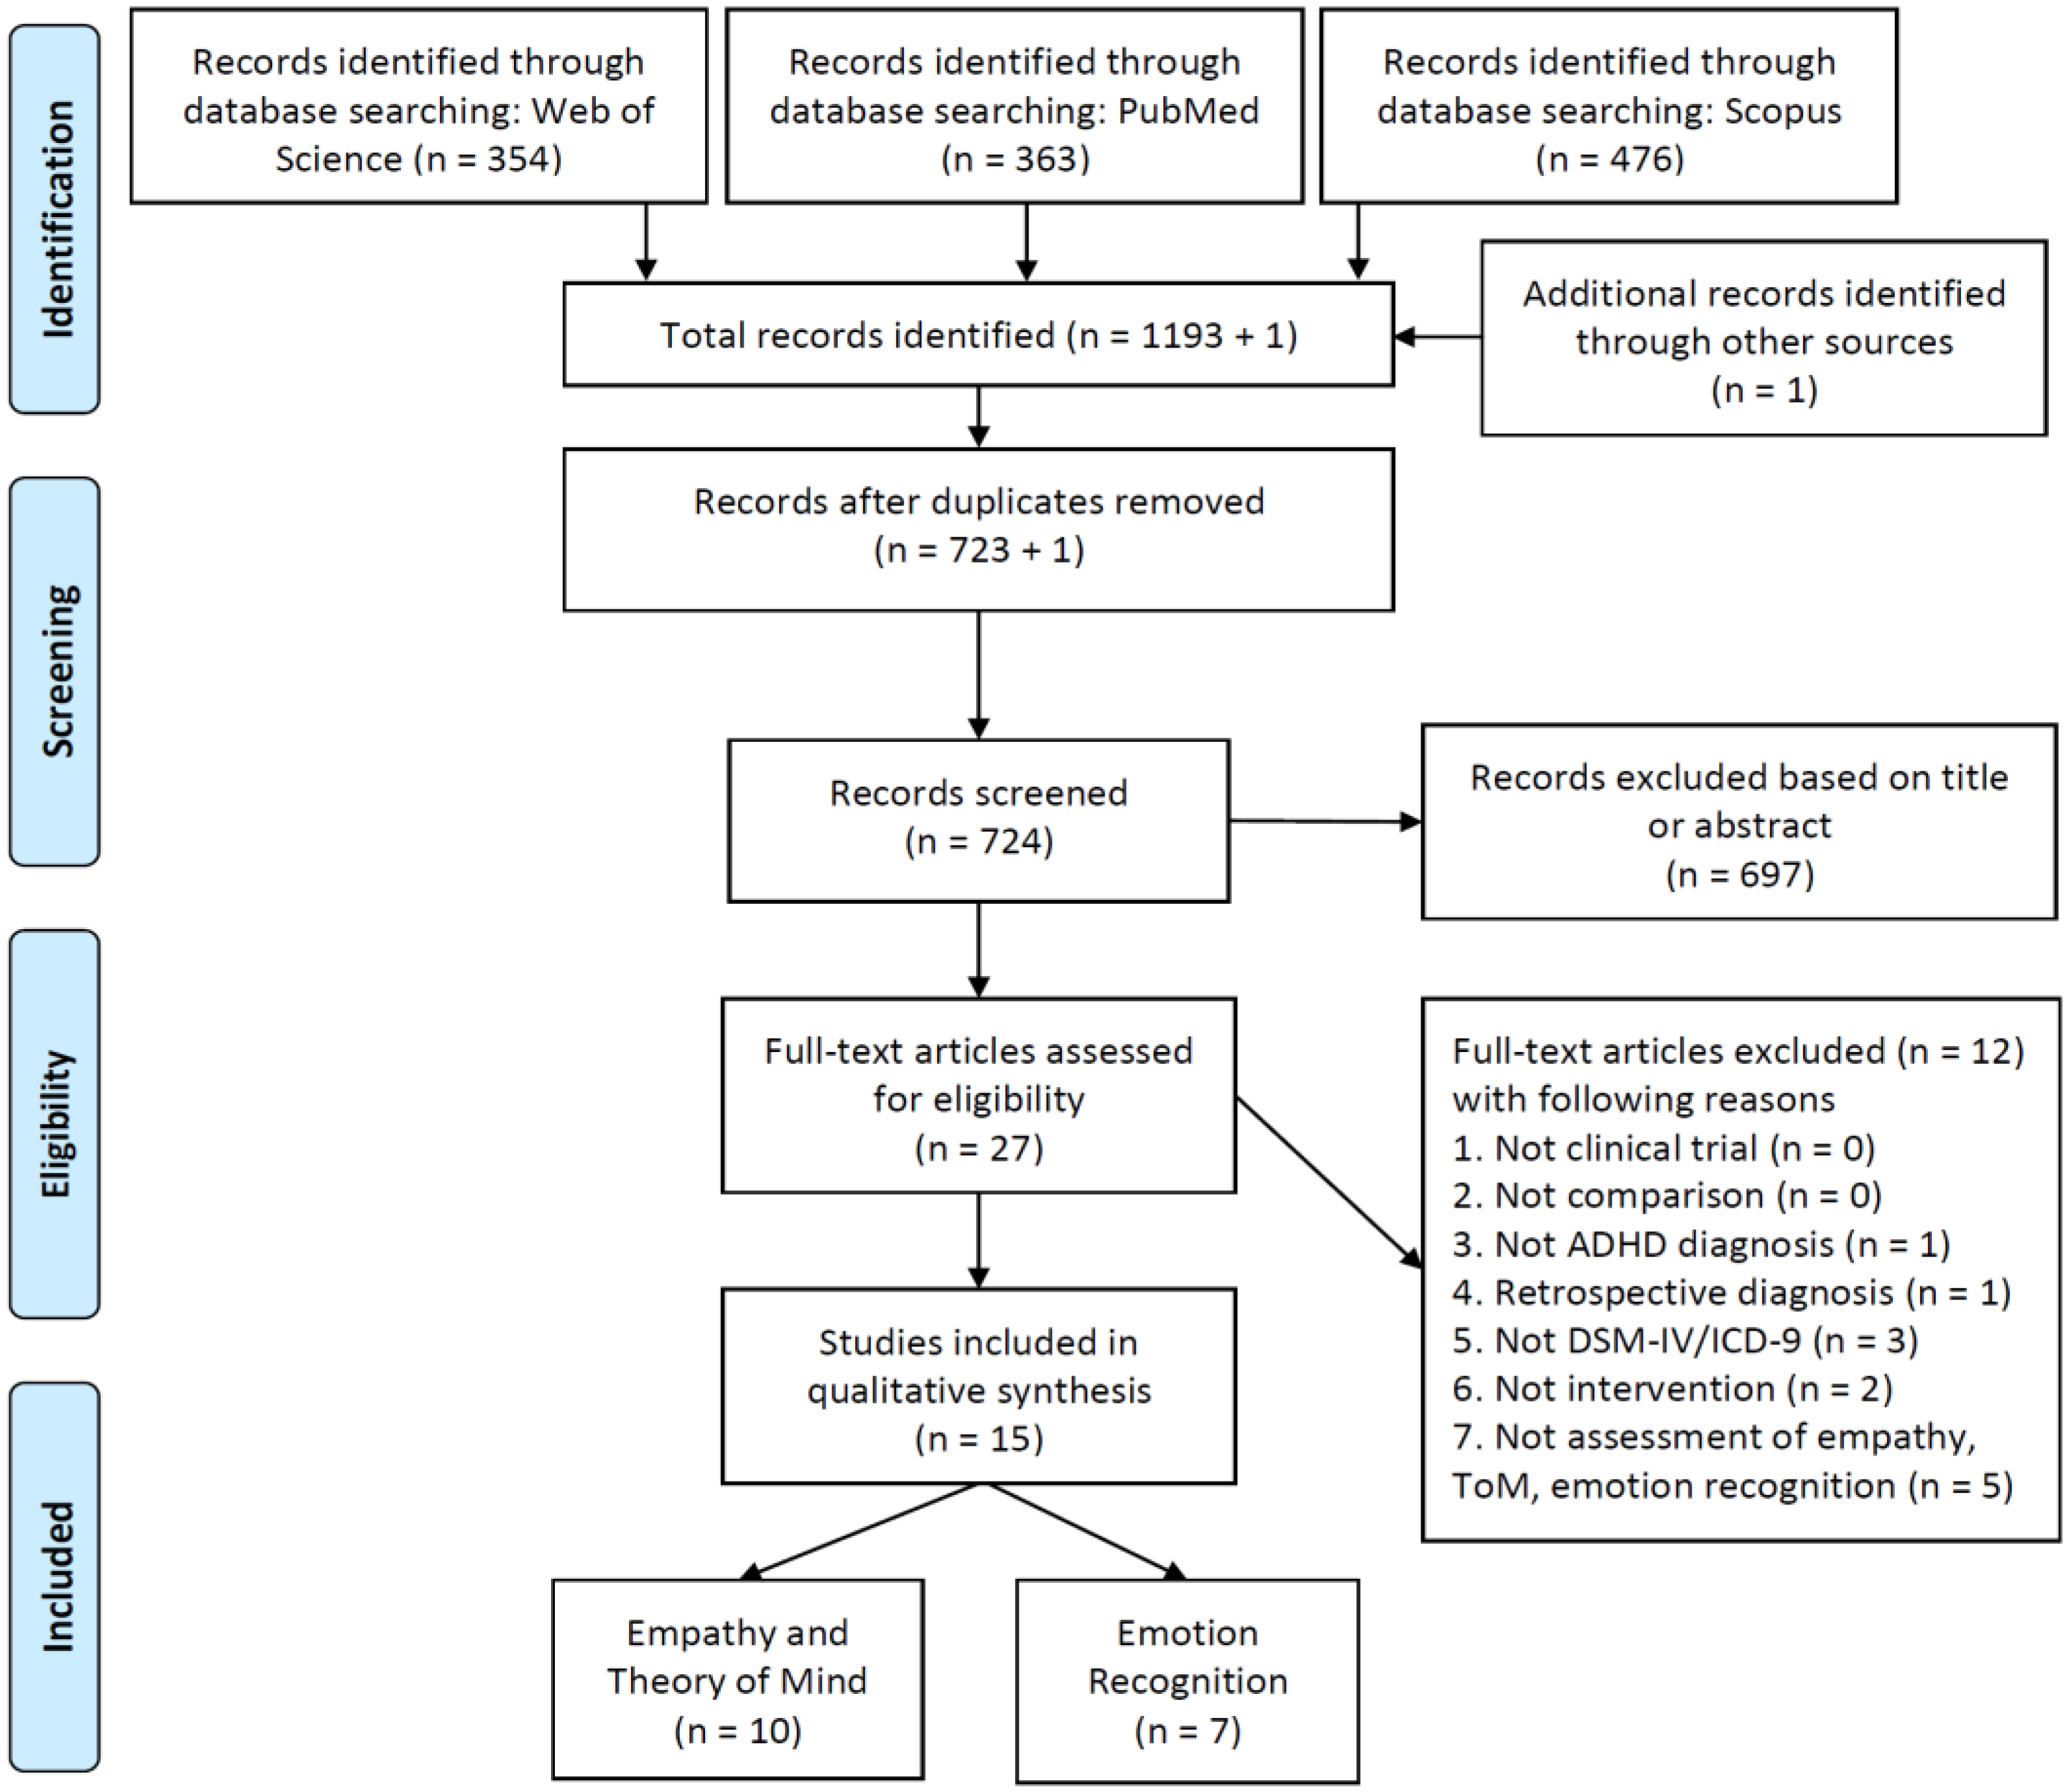 Online parent training platform for complementary treatment of disruptive  behavior disorders in attention deficit hyperactivity disorder: A  randomized controlled trial protocol